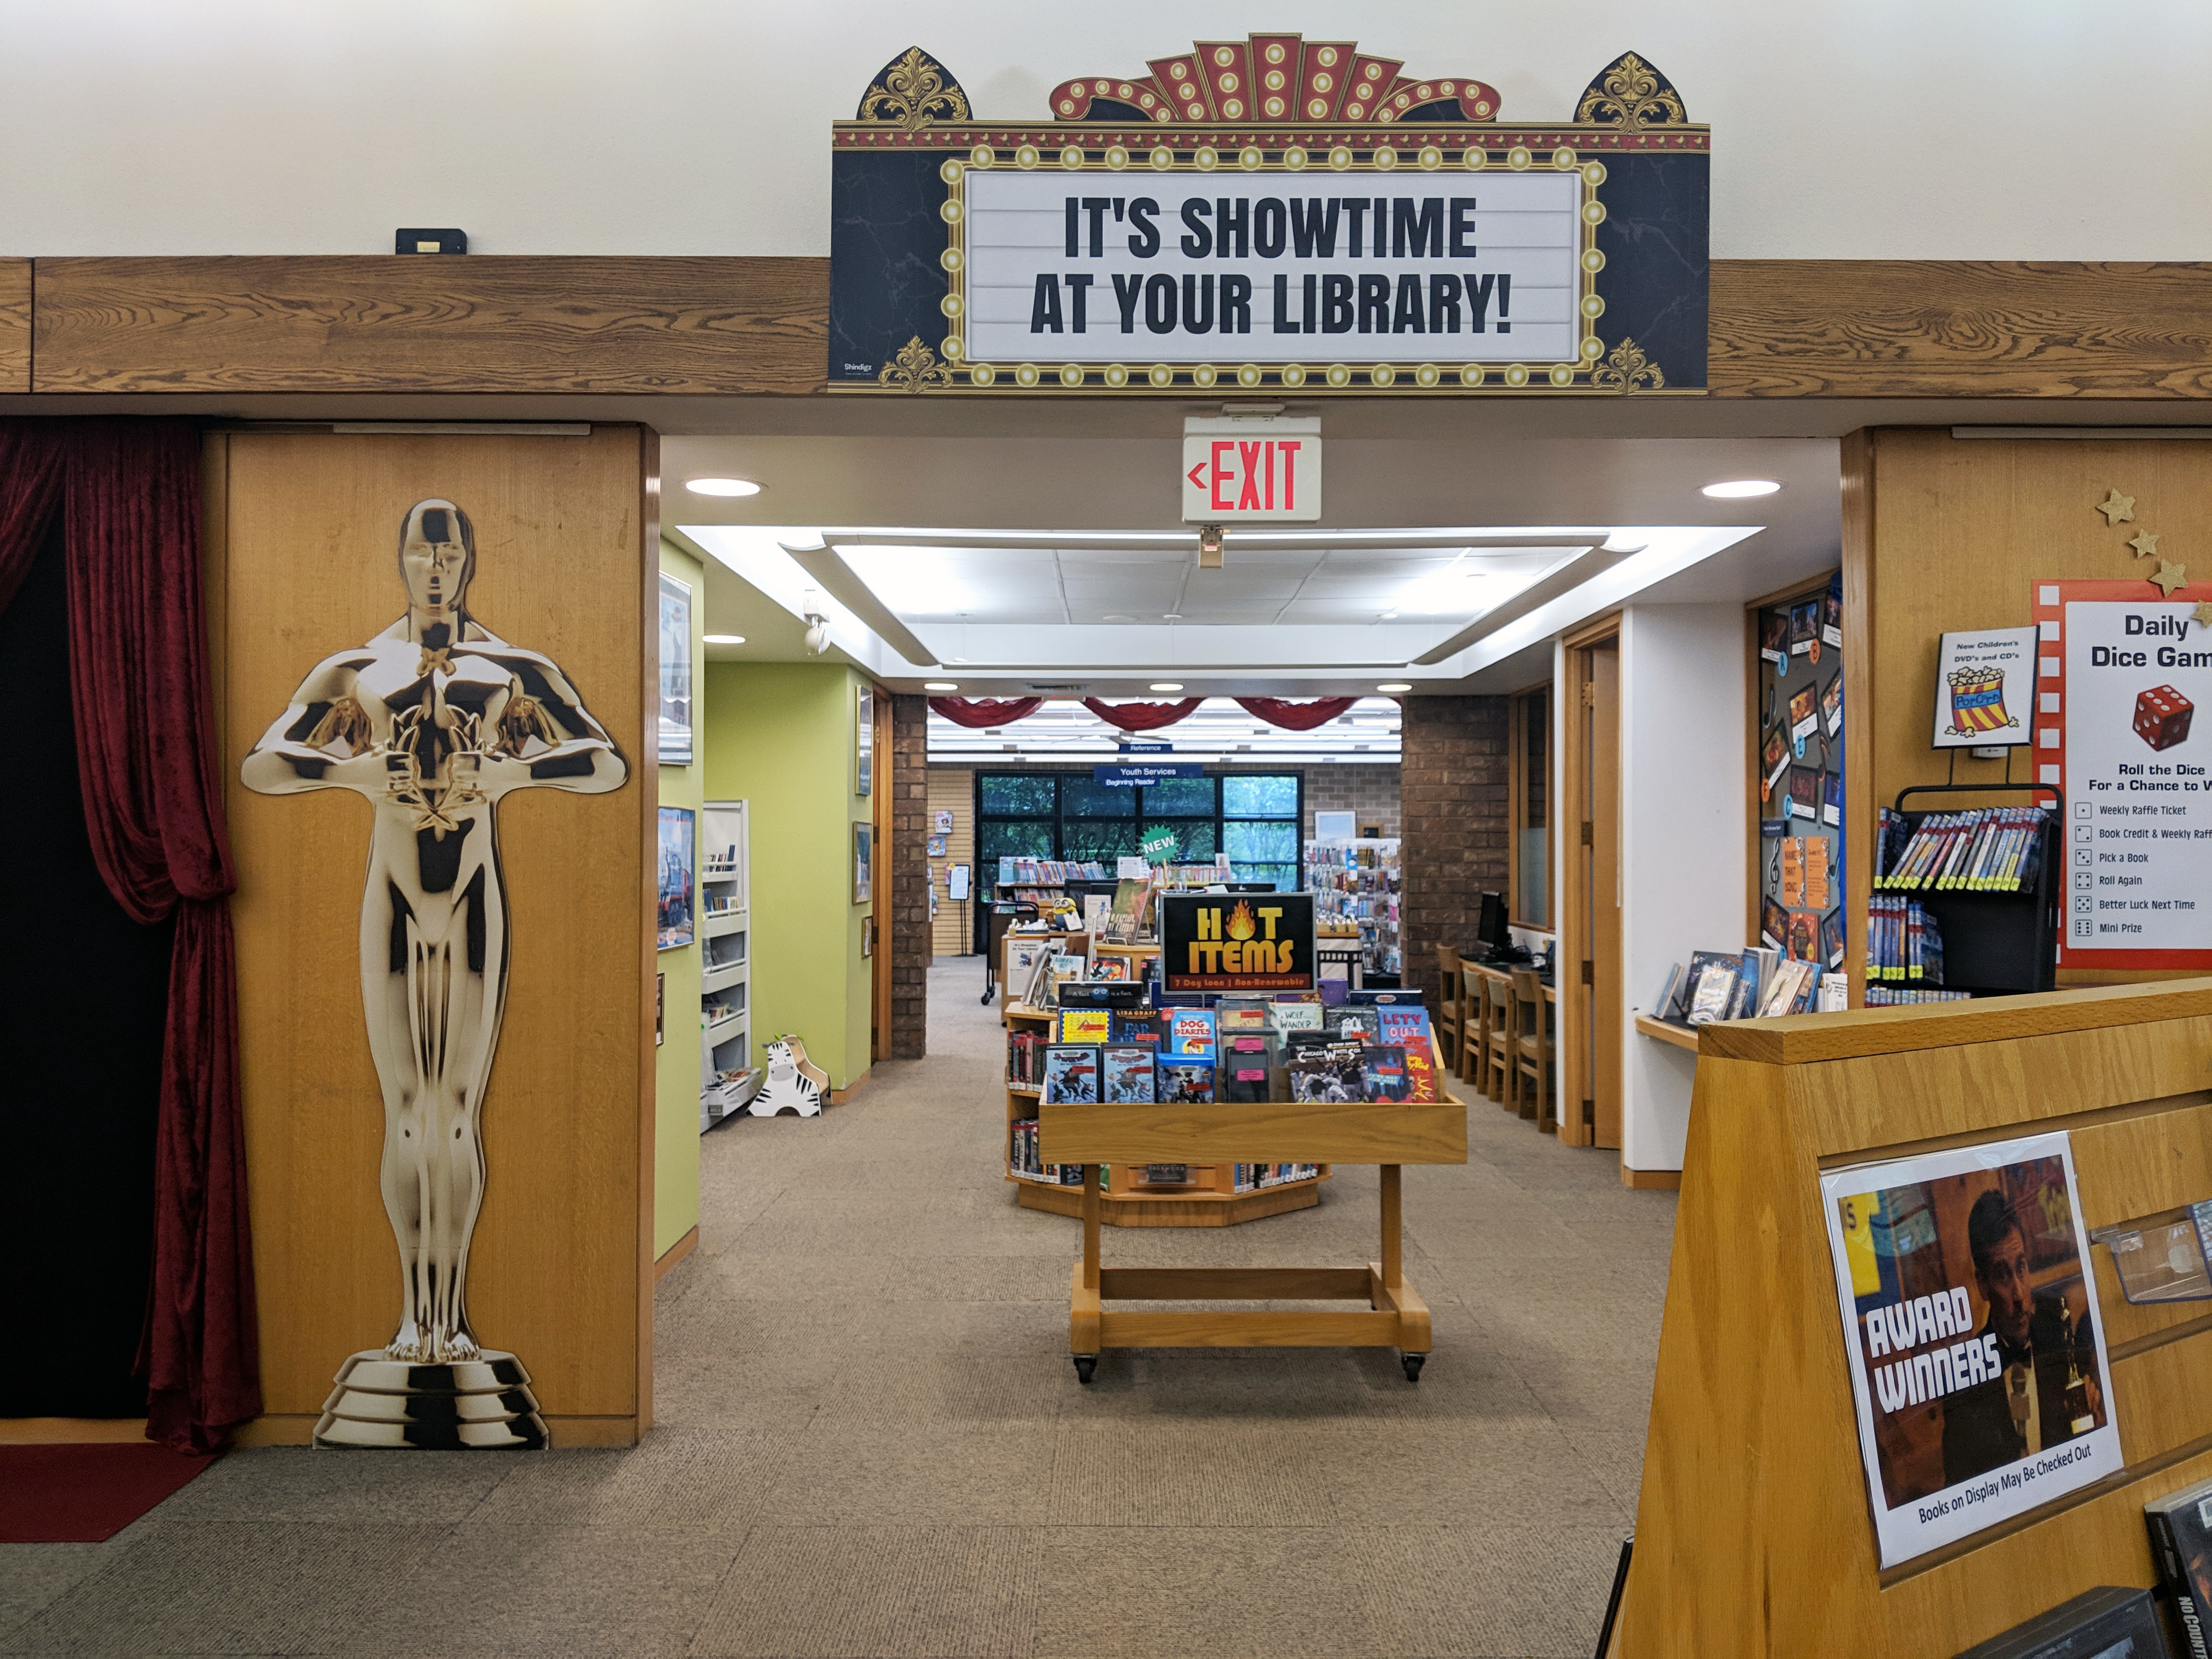 Entrance of the library adorned with cutouts of the Oscars statue and a movie theatre marquee that reads, "It's Showtime at your Library"